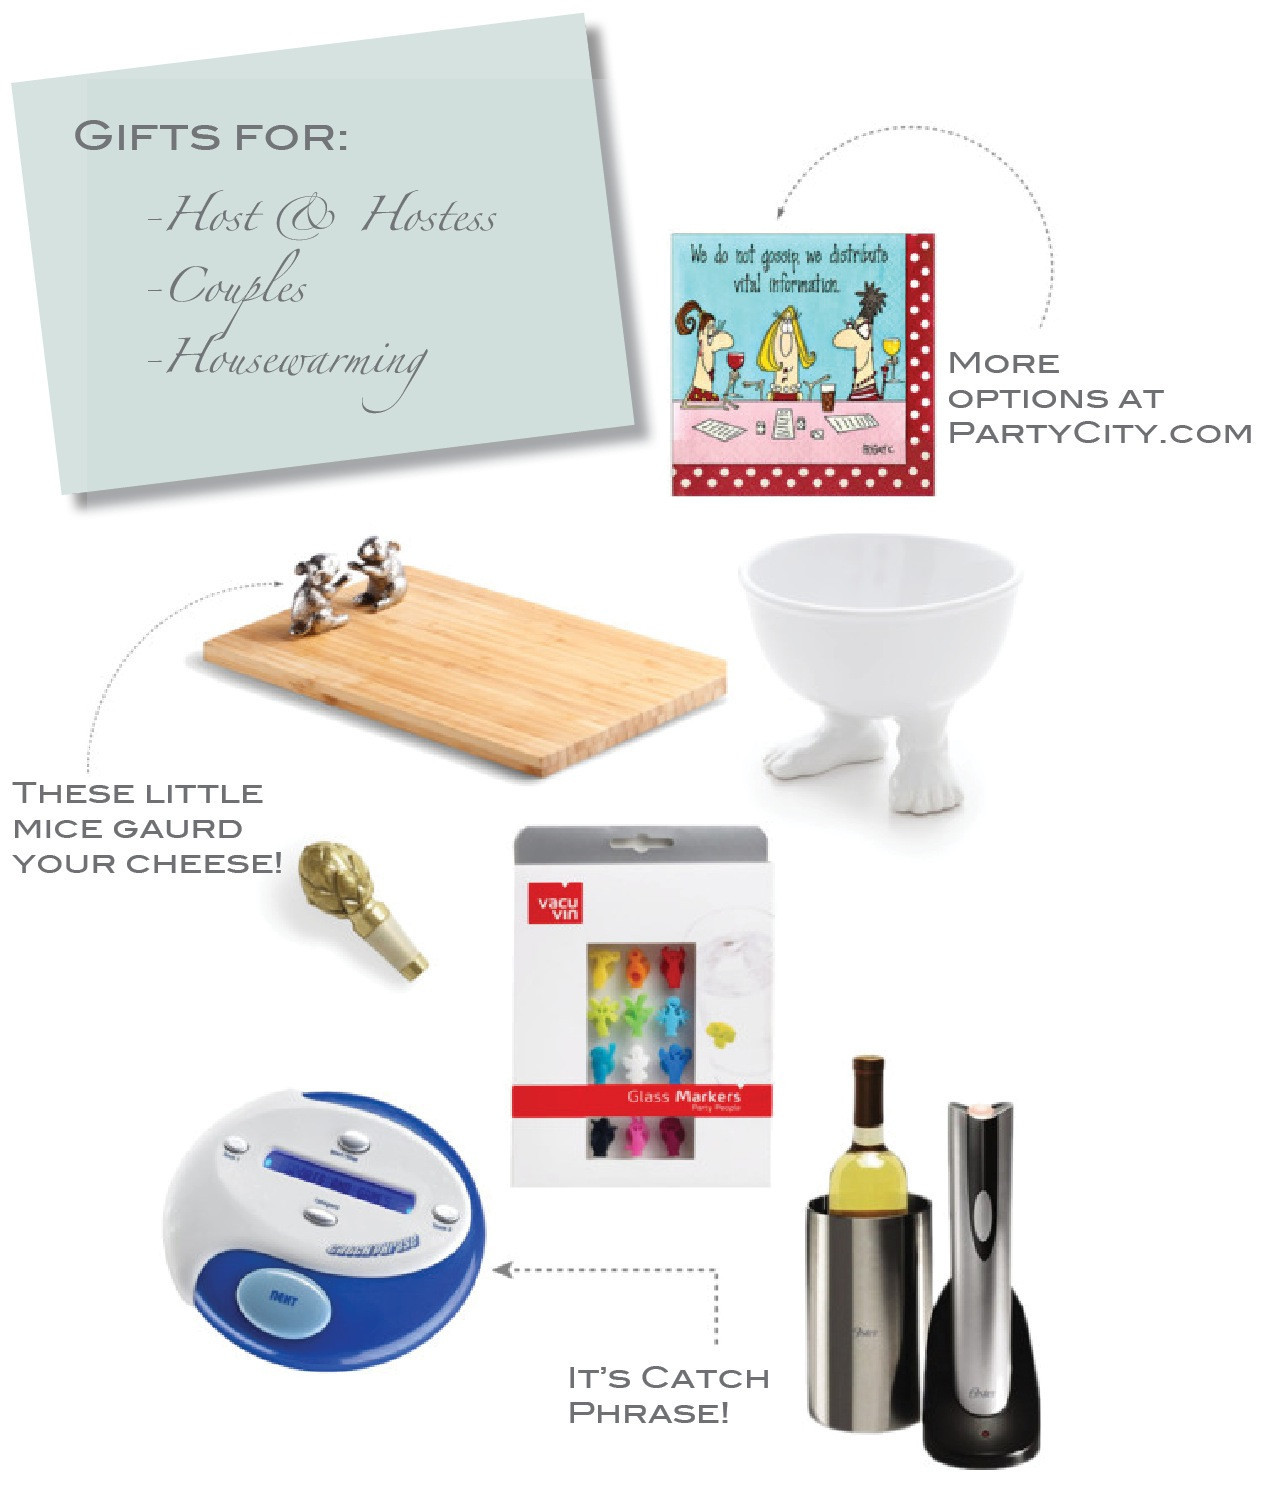 Host Gift Ideas For Couples
 The 20 Best Ideas for Host Gift Ideas for Couples Home